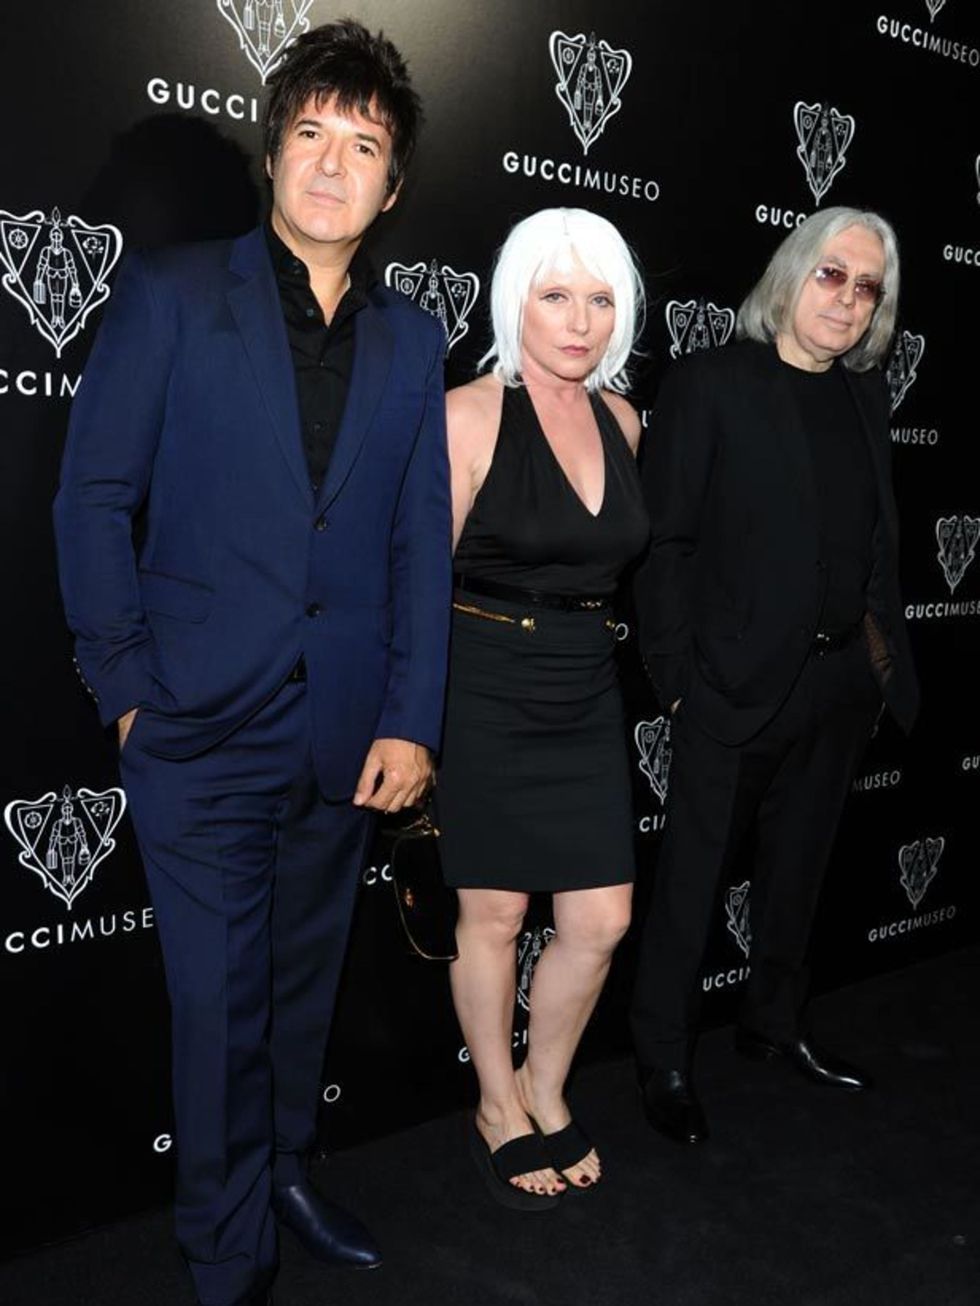 <p>Blondie performed at the <a href="http://www.elleuk.com/catwalk/collections/gucci/">Gucci</a> Museum Opening with bandmates Clem Burke &amp; Chris Stein, 26 September 26, 2011</p>